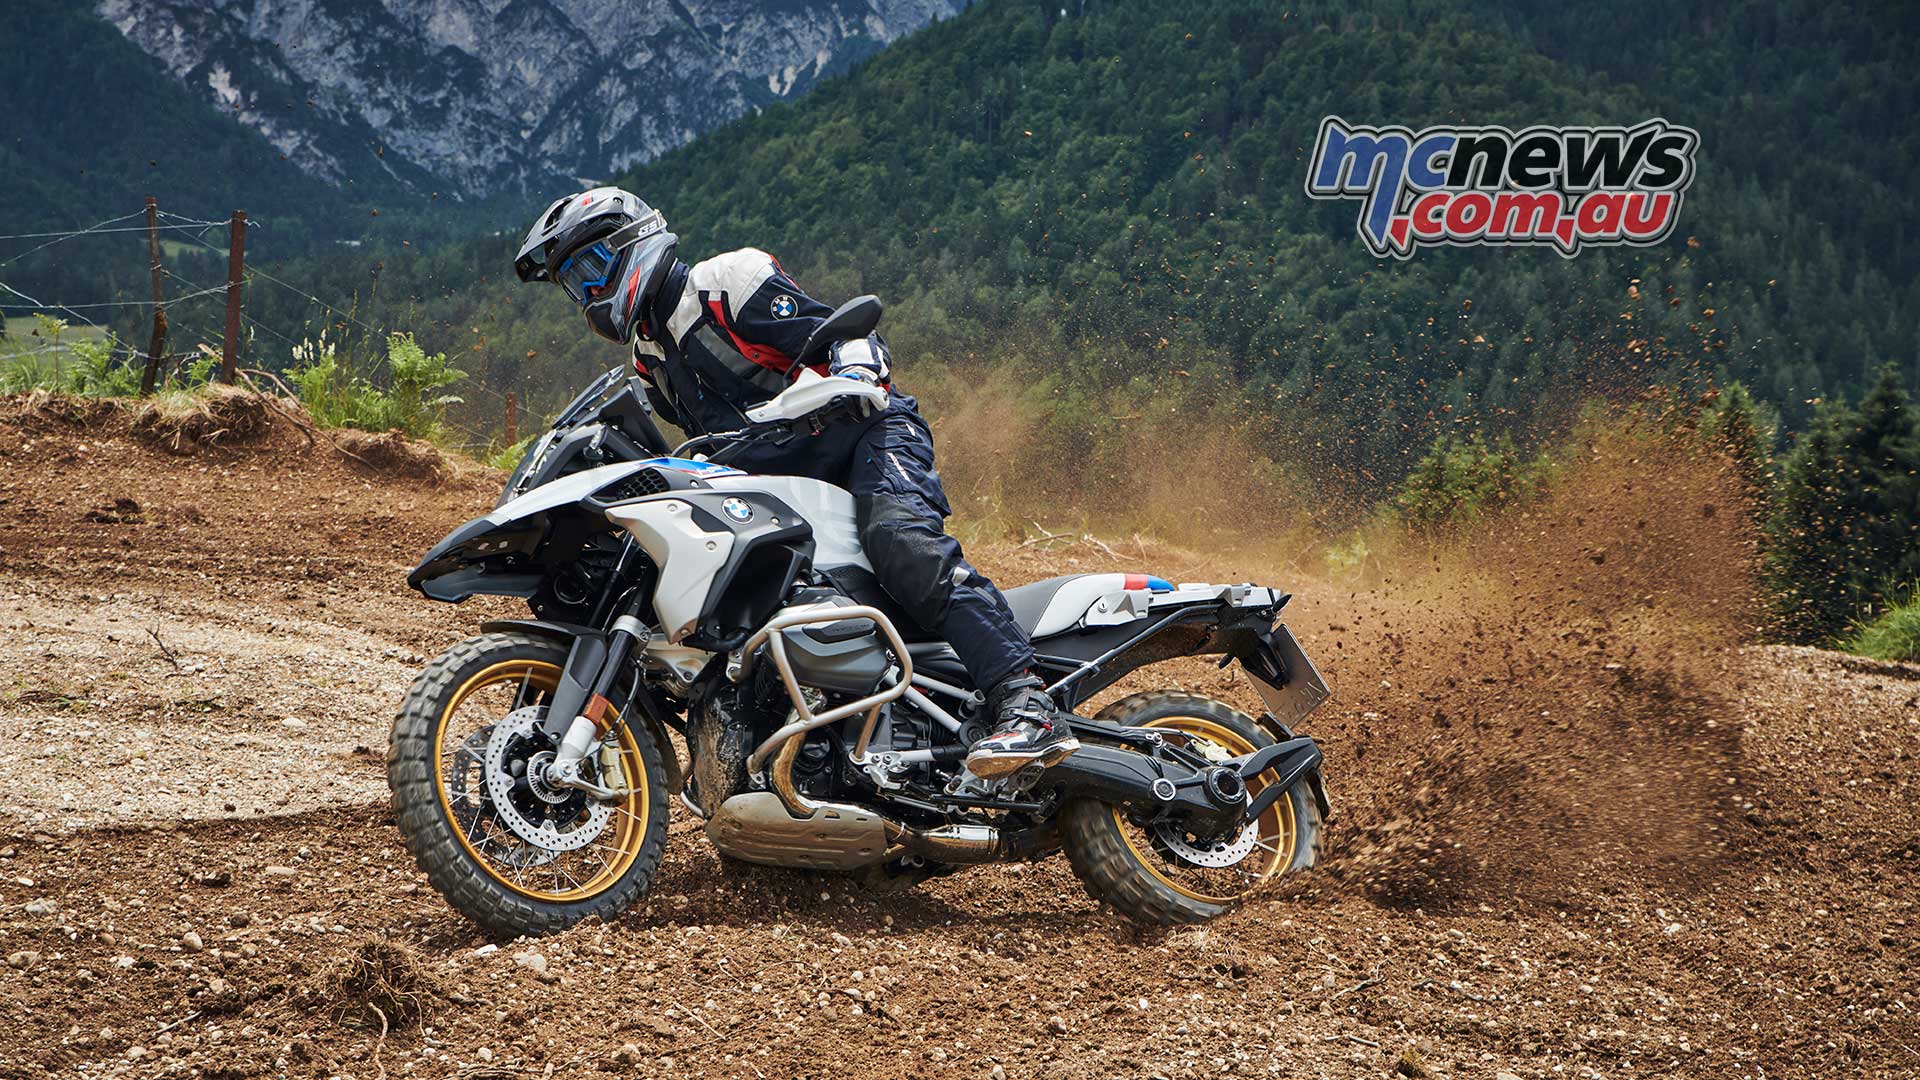 BMW R 1250 GS. More grunt and more tech